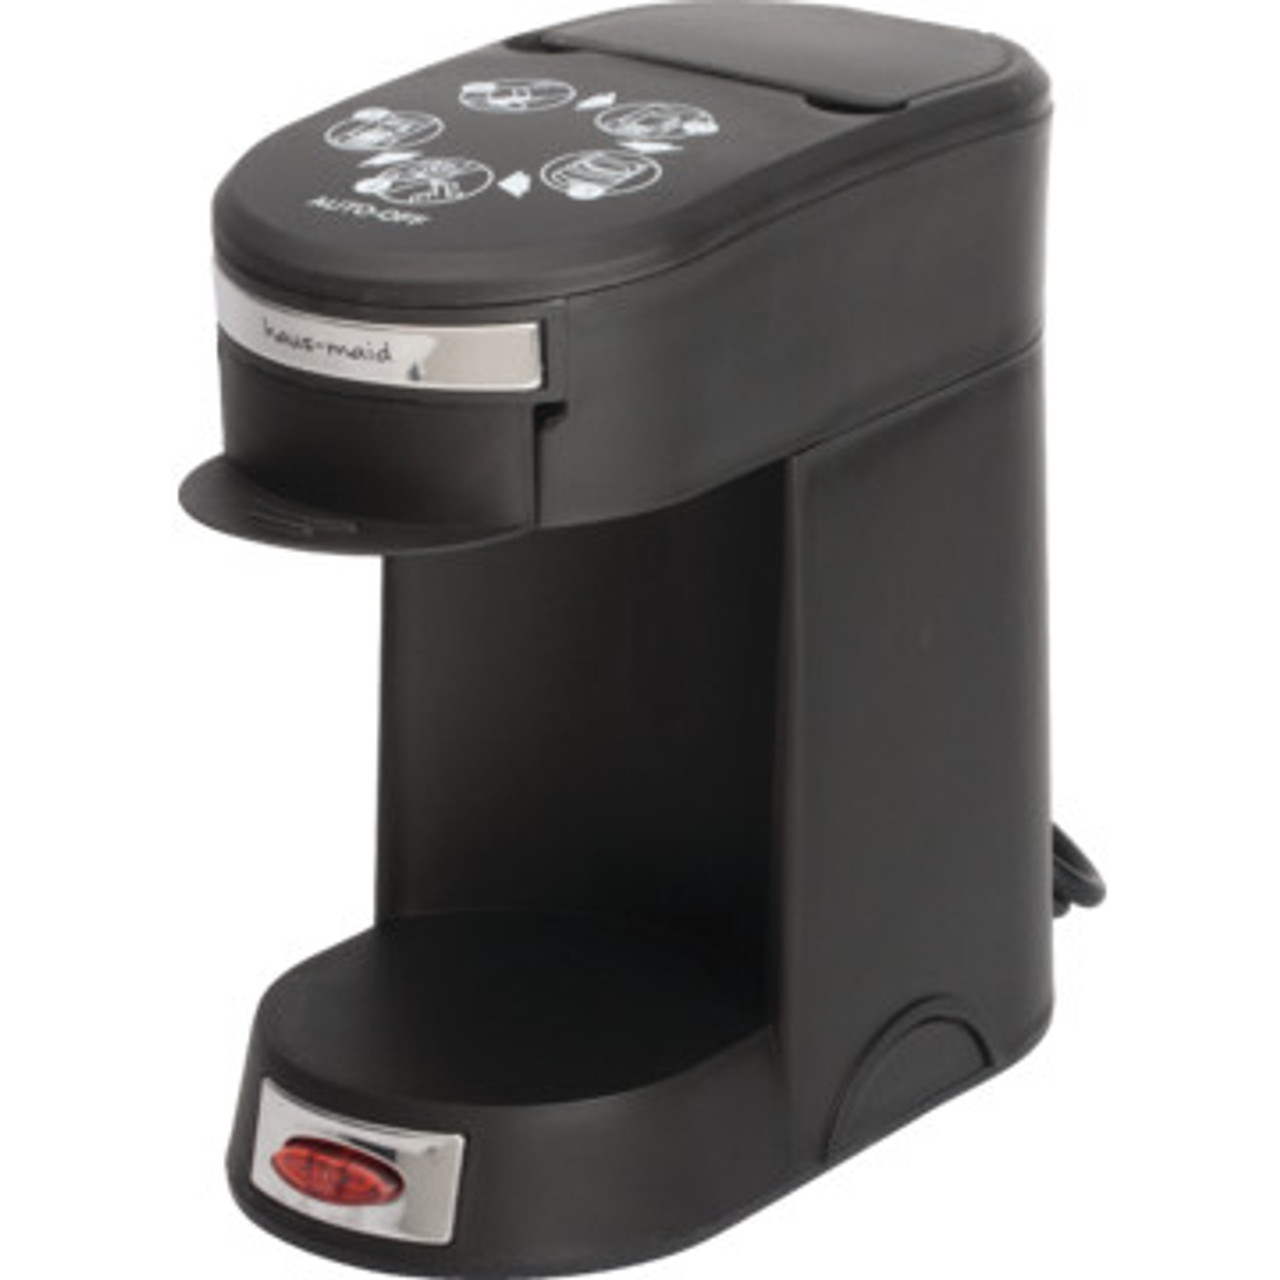 Haus-Maid 1 Cup Coffeemaker in Black